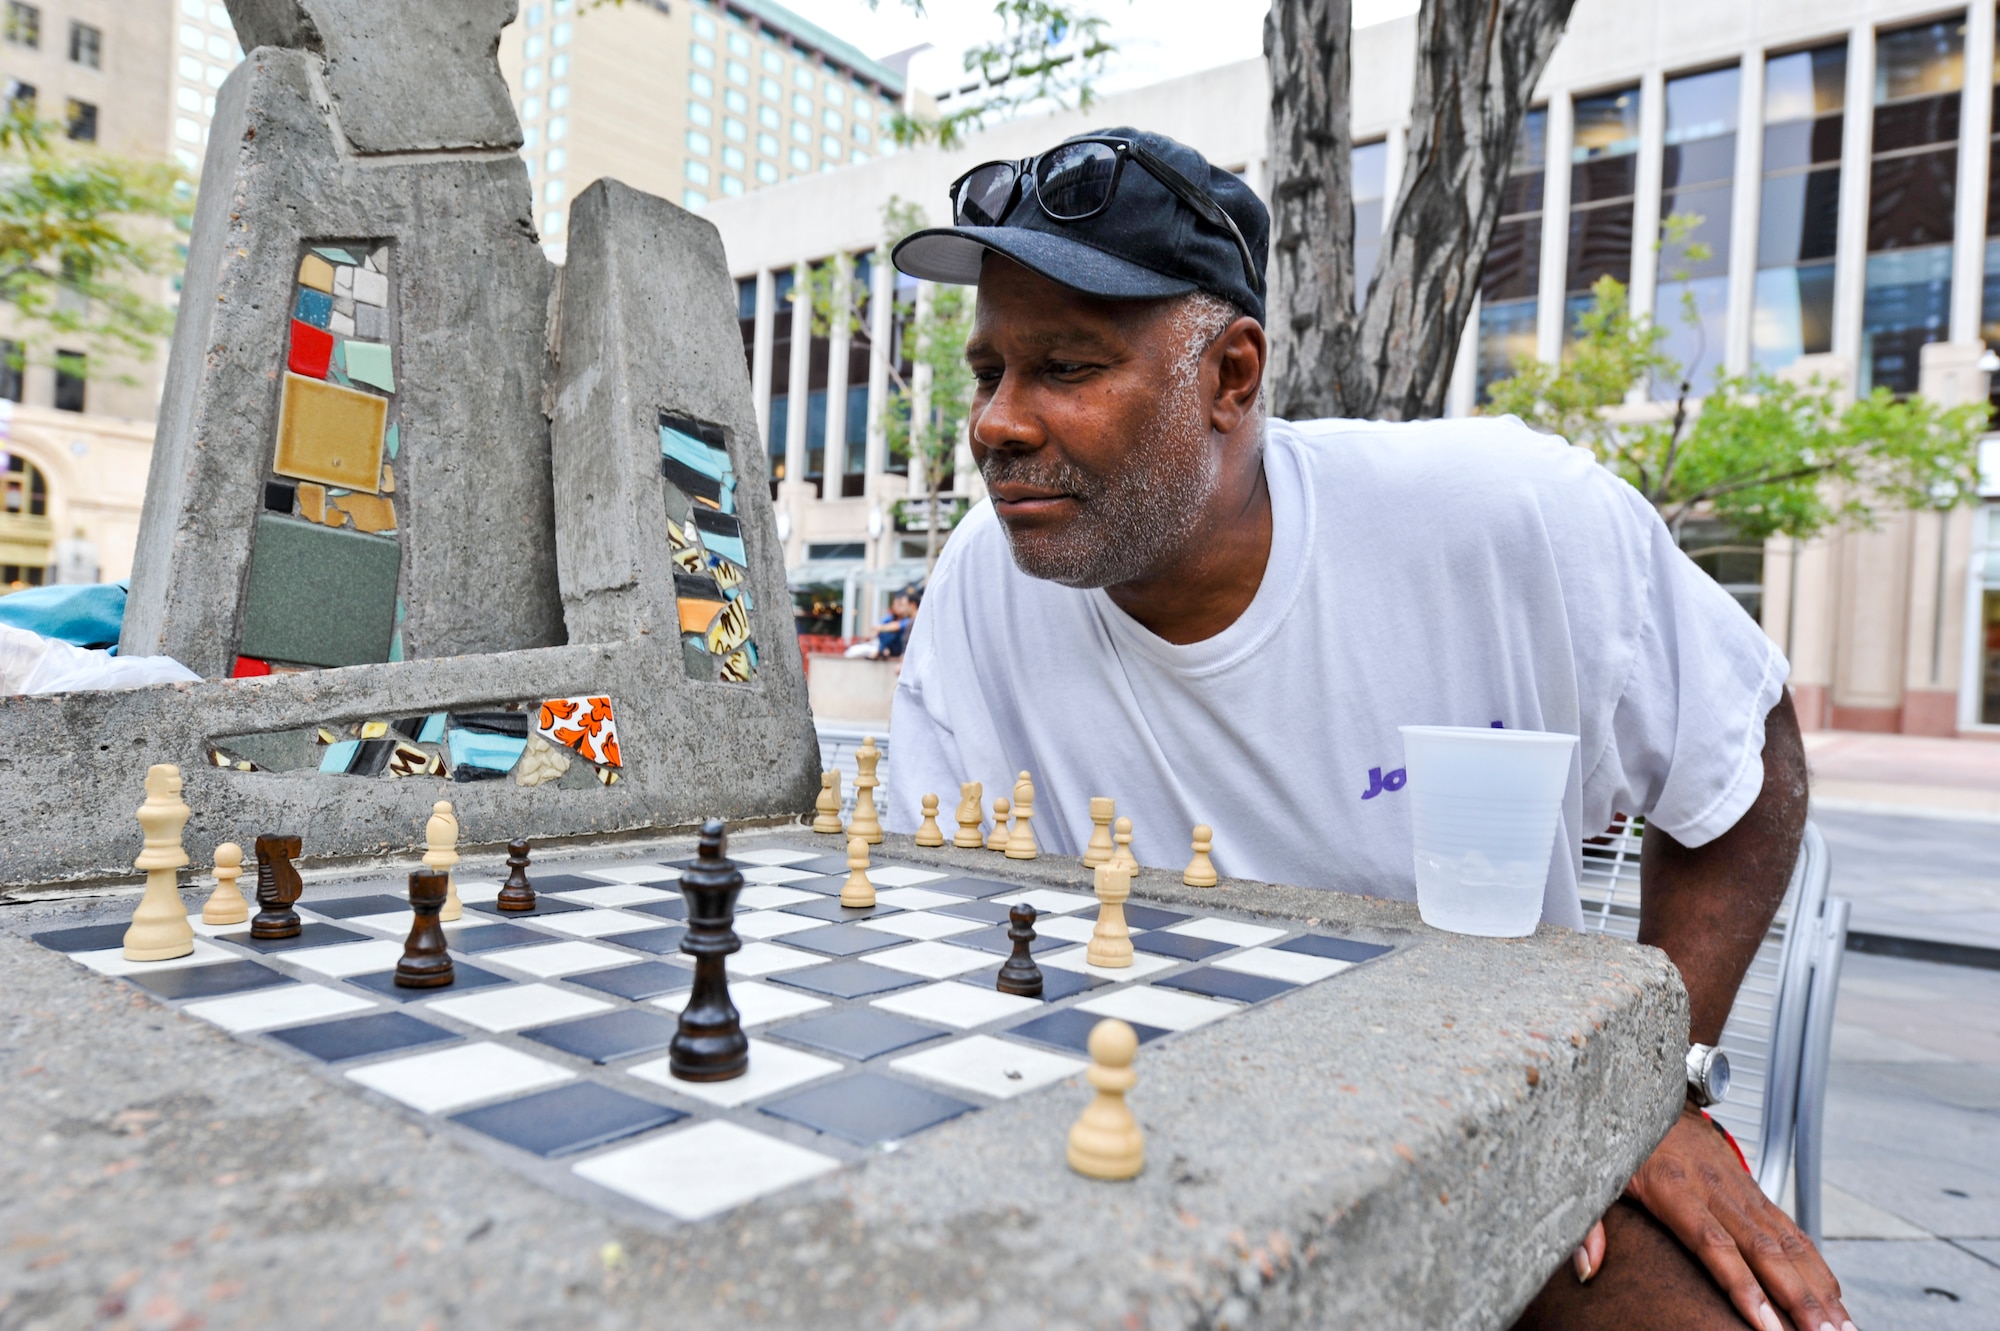 DENVER – A chess player ponders his next move during a chess match Aug. 24, 2012. Several chess and checkers tables are located throughout 16th Street downtown. Bring your own pieces as they are not provided. (U.S. Air Force photo by Senior Airman Christopher Gross)